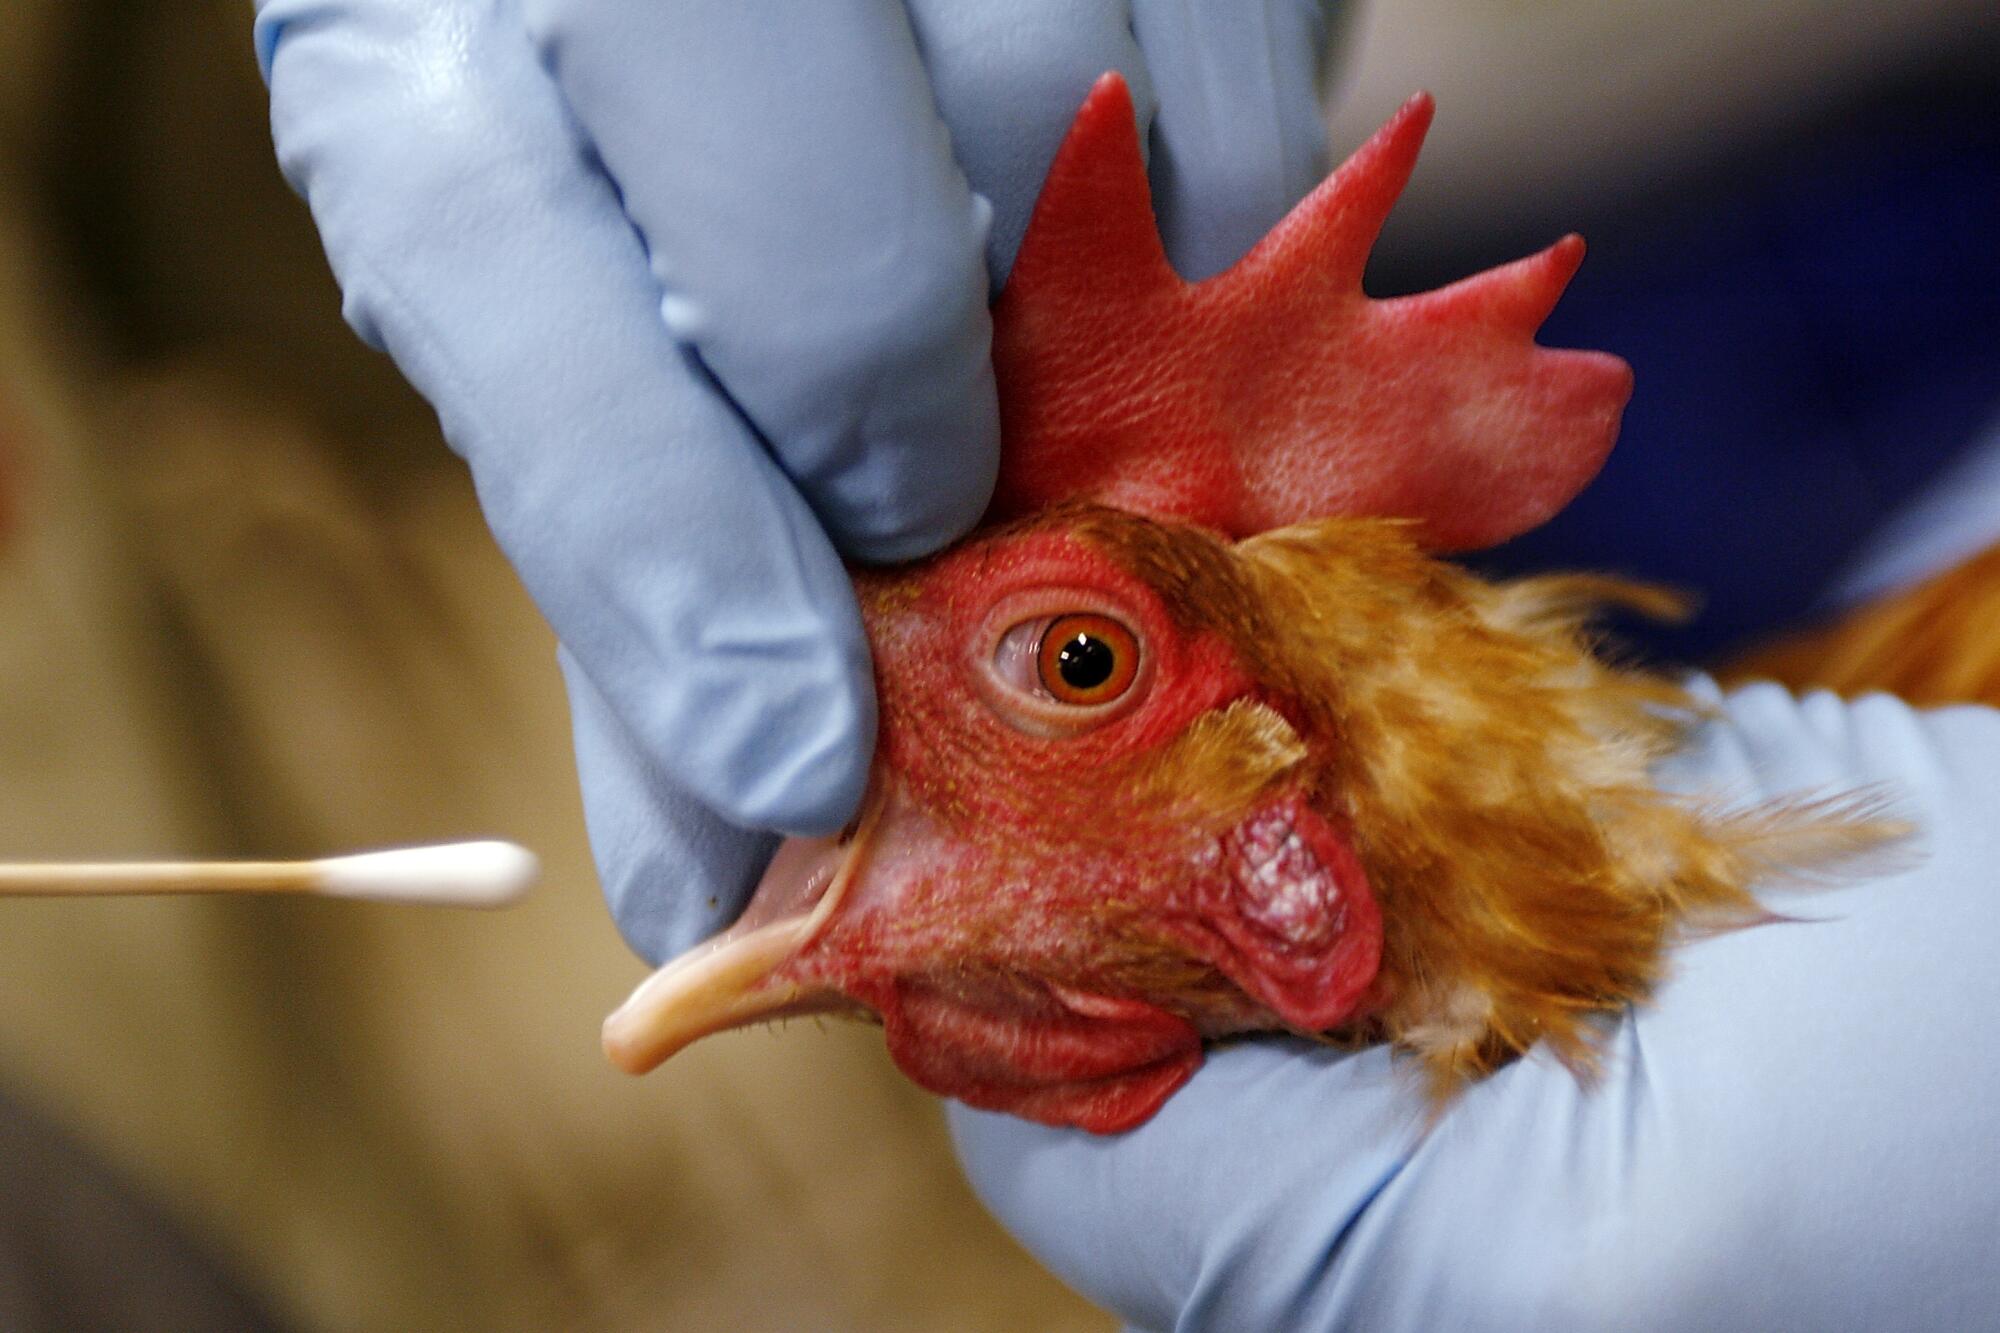 A culture swab is performed on a rooster.